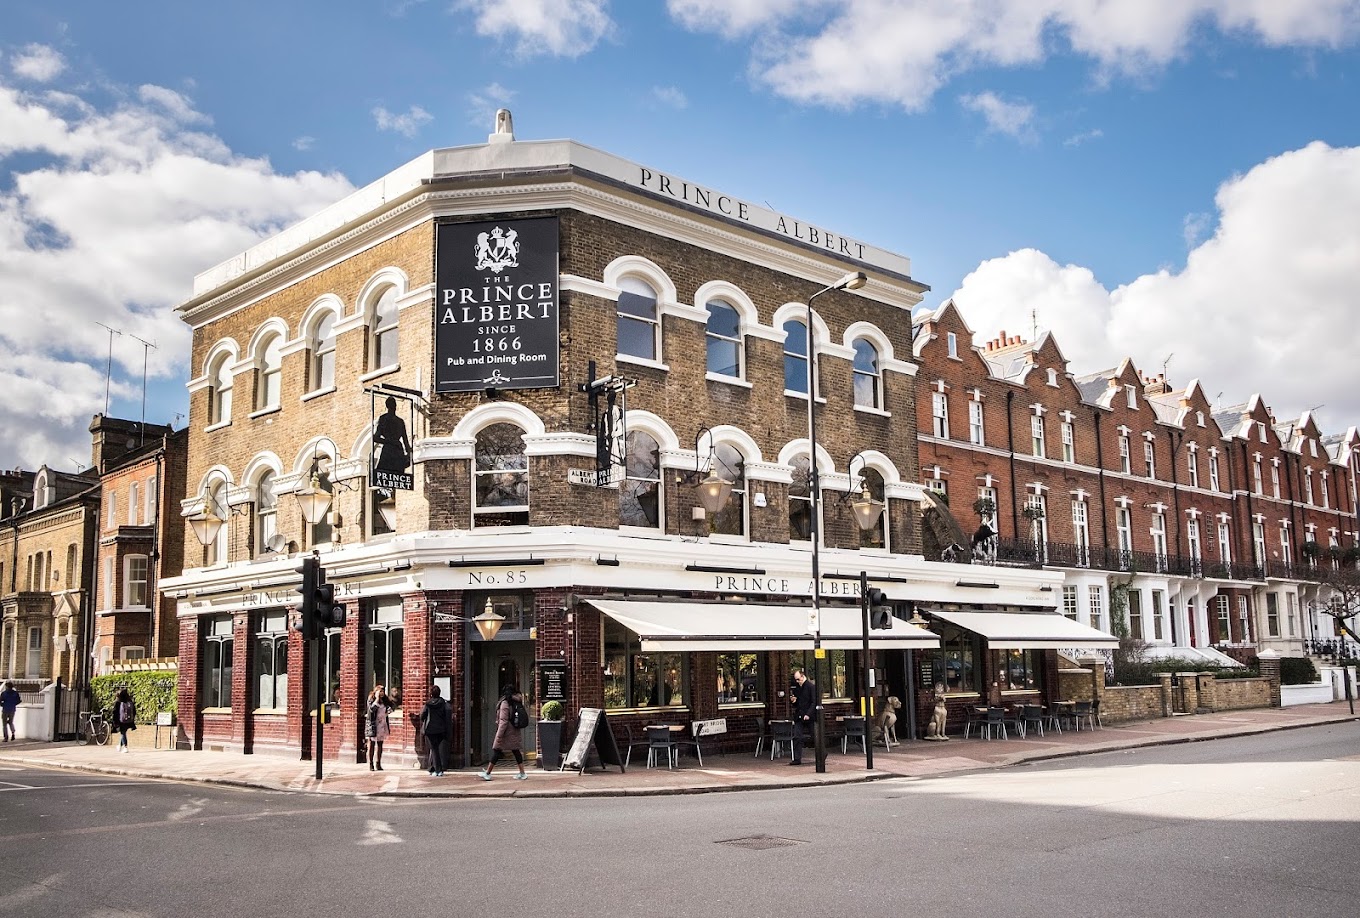 Explore the vibrant pub scene in Battersea with our guide to the top watering holes in the area. From cozy traditional pubs to trendy gastropubs, we've rounded up the best spots to enjoy a pint or two. #battersea #londonpubs Things To Do In London | Things To Do In Battersea | Best Pubs In Battersea | Best Pubs In London | Best Pub Food | Sunday Roast | Places To Eat In London #londonnightlife | Things To Do At Night